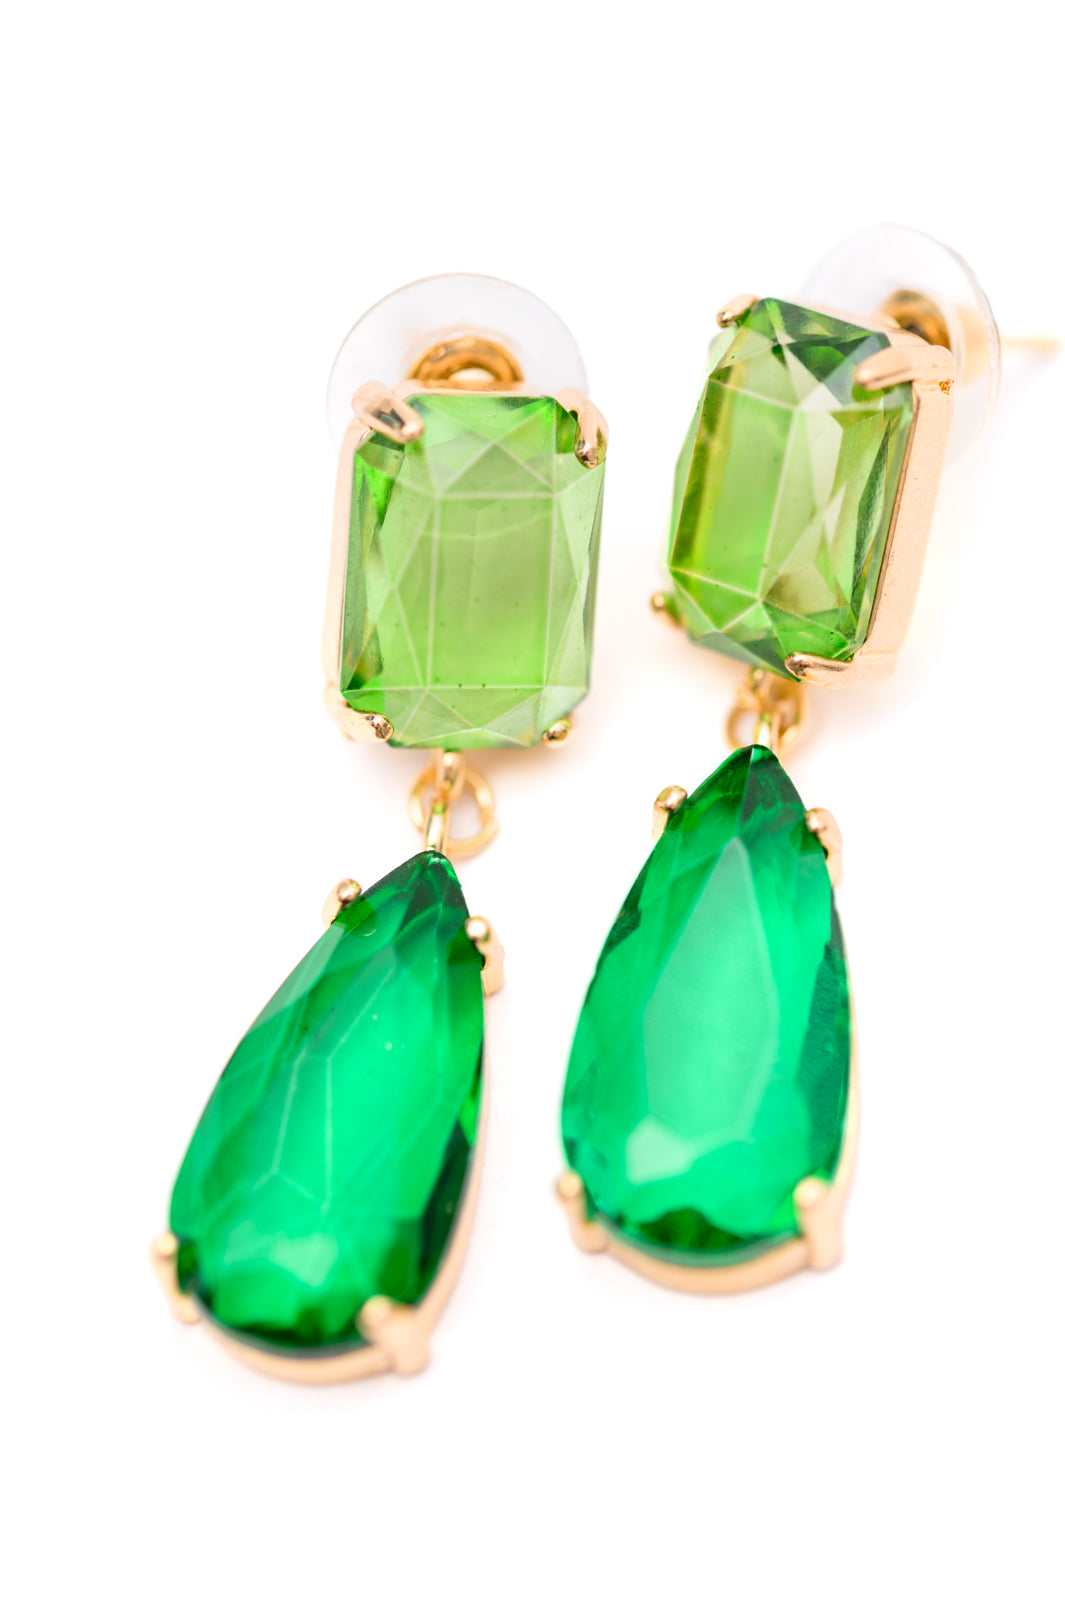 Make a stylish statement with these Sparkly Spirit Drop Crystal Earrings. Featuring mounted crystal stones and post earrings, they provide a stunning pop of color for any look.